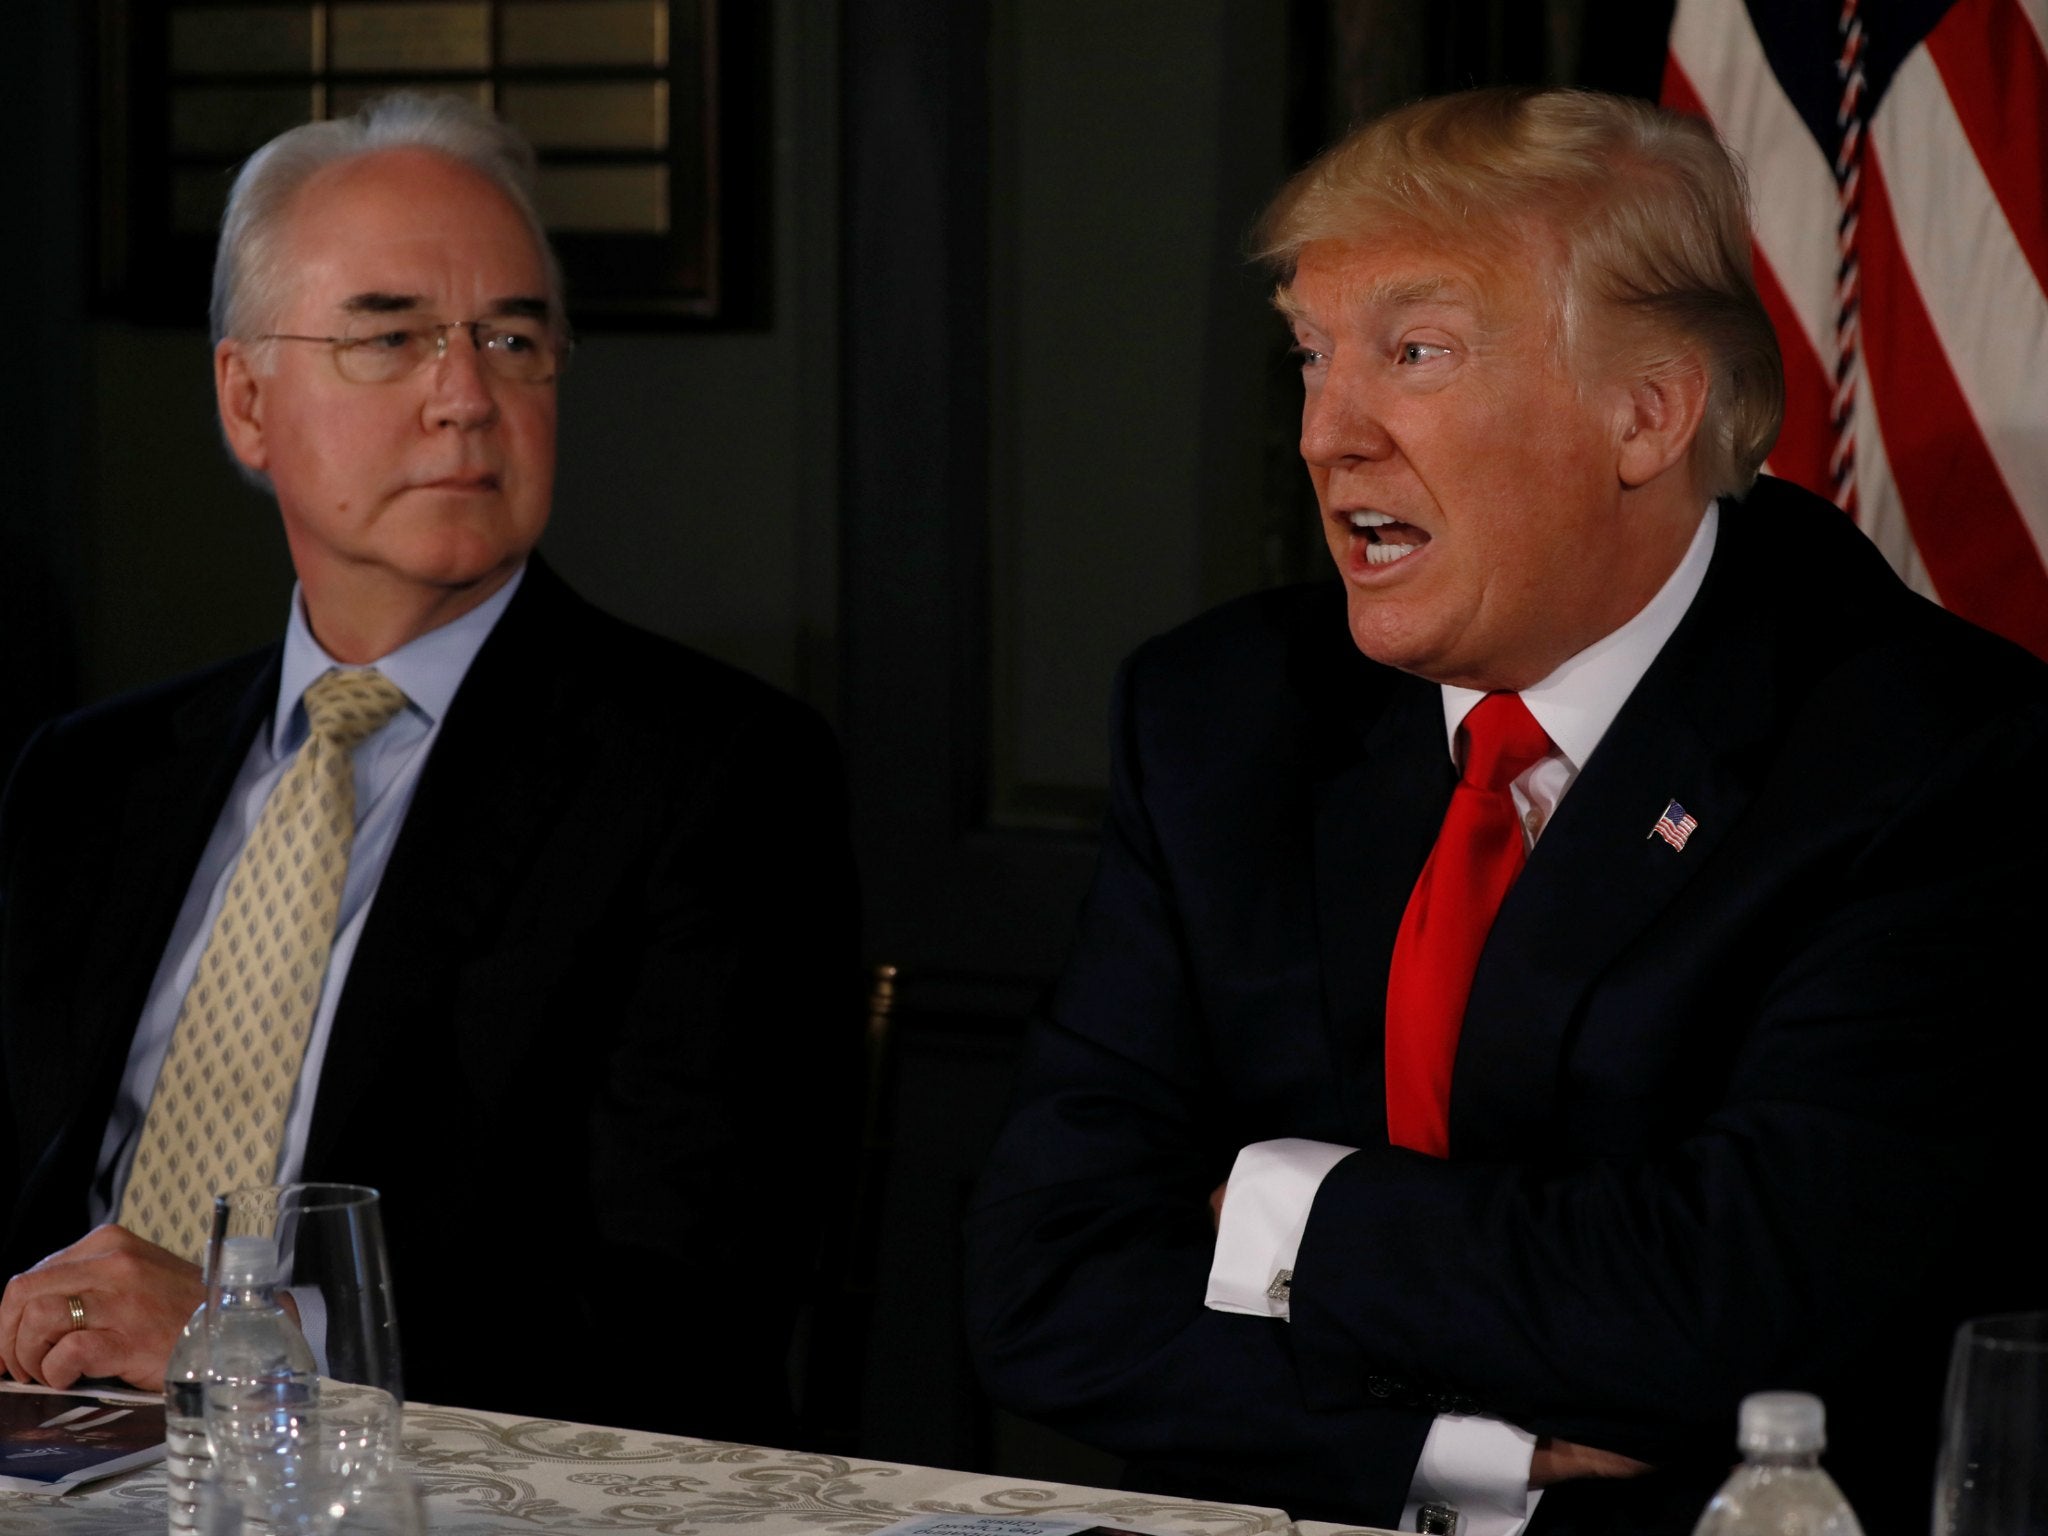 Donald Trump, flanked by Secretary of Health and Human Services Tom Price, at an opioid-related briefing in Bedminster, New Jersey, August 8, 2017.